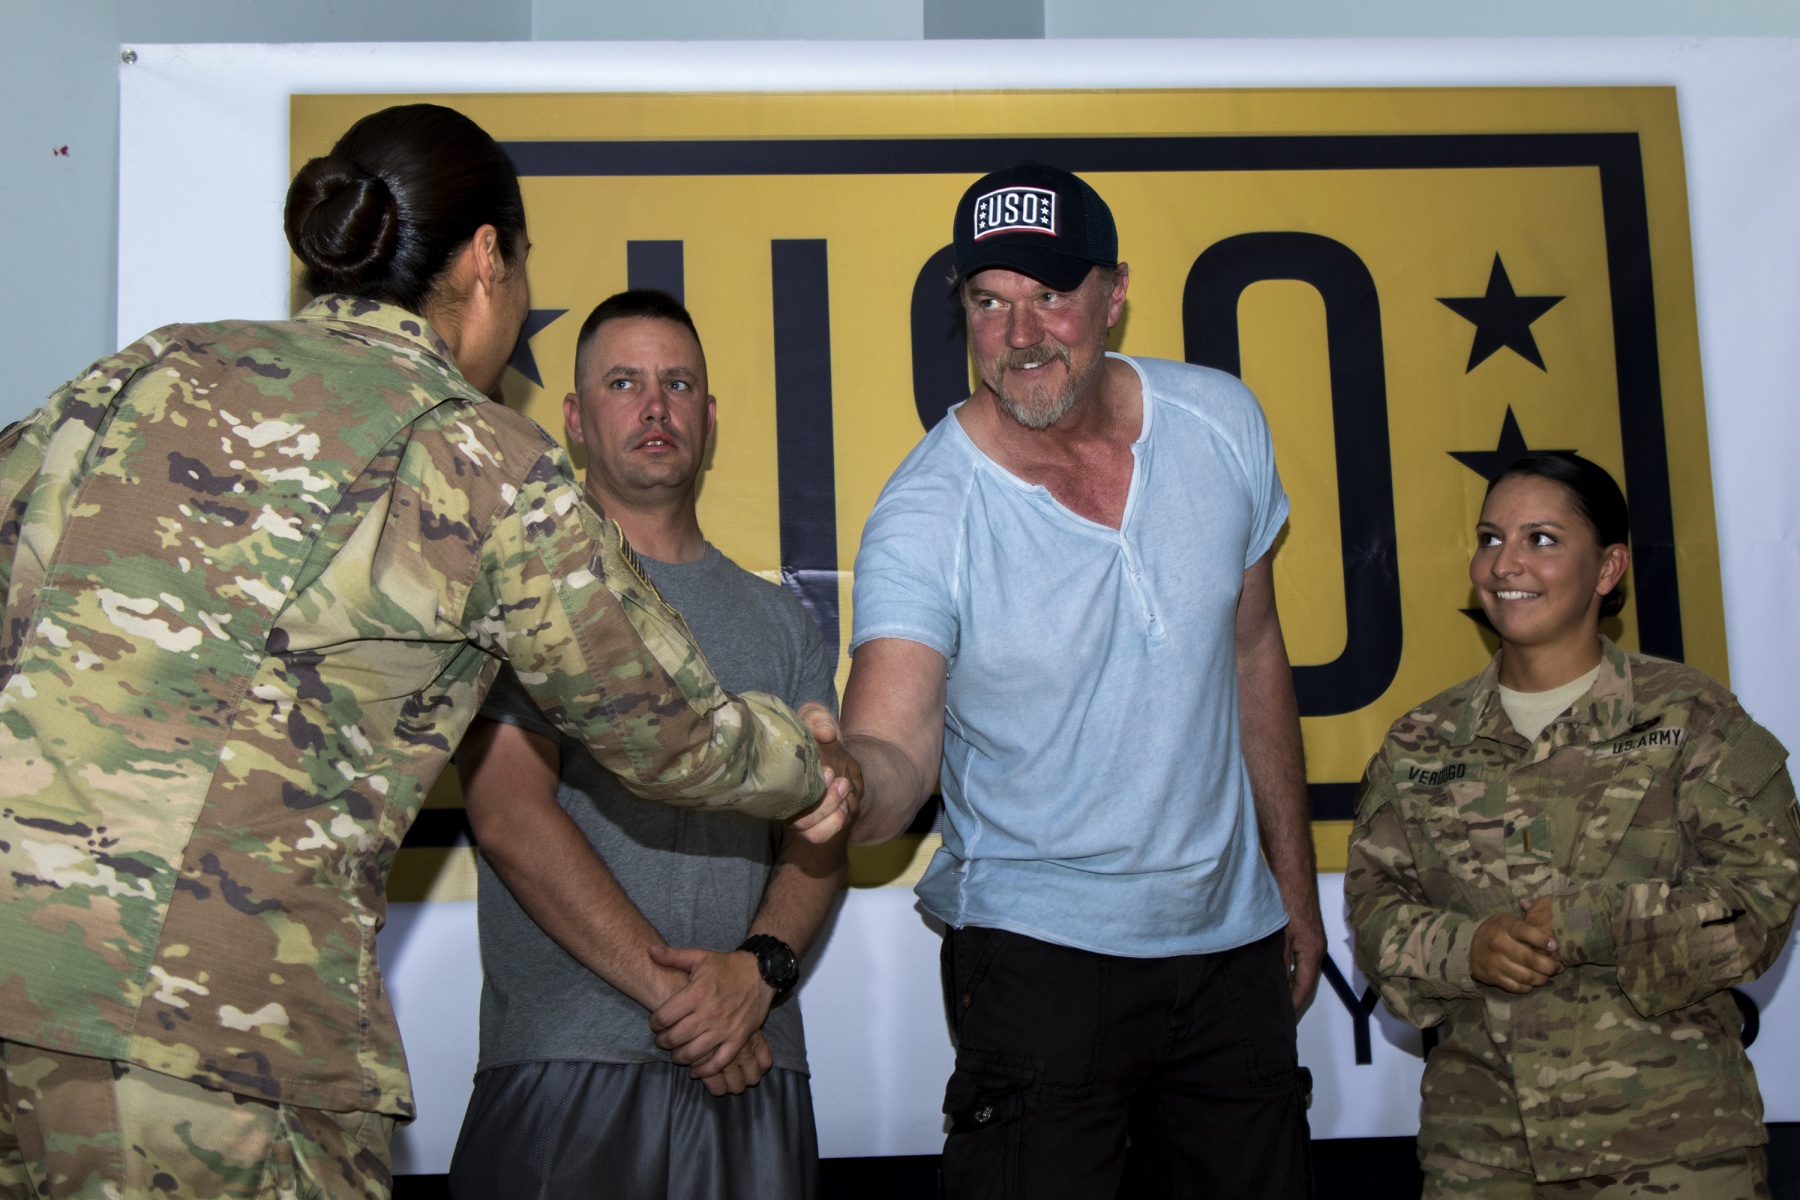 Singer Trace Adkins big fan of veterans, wounded warriors | Article ...